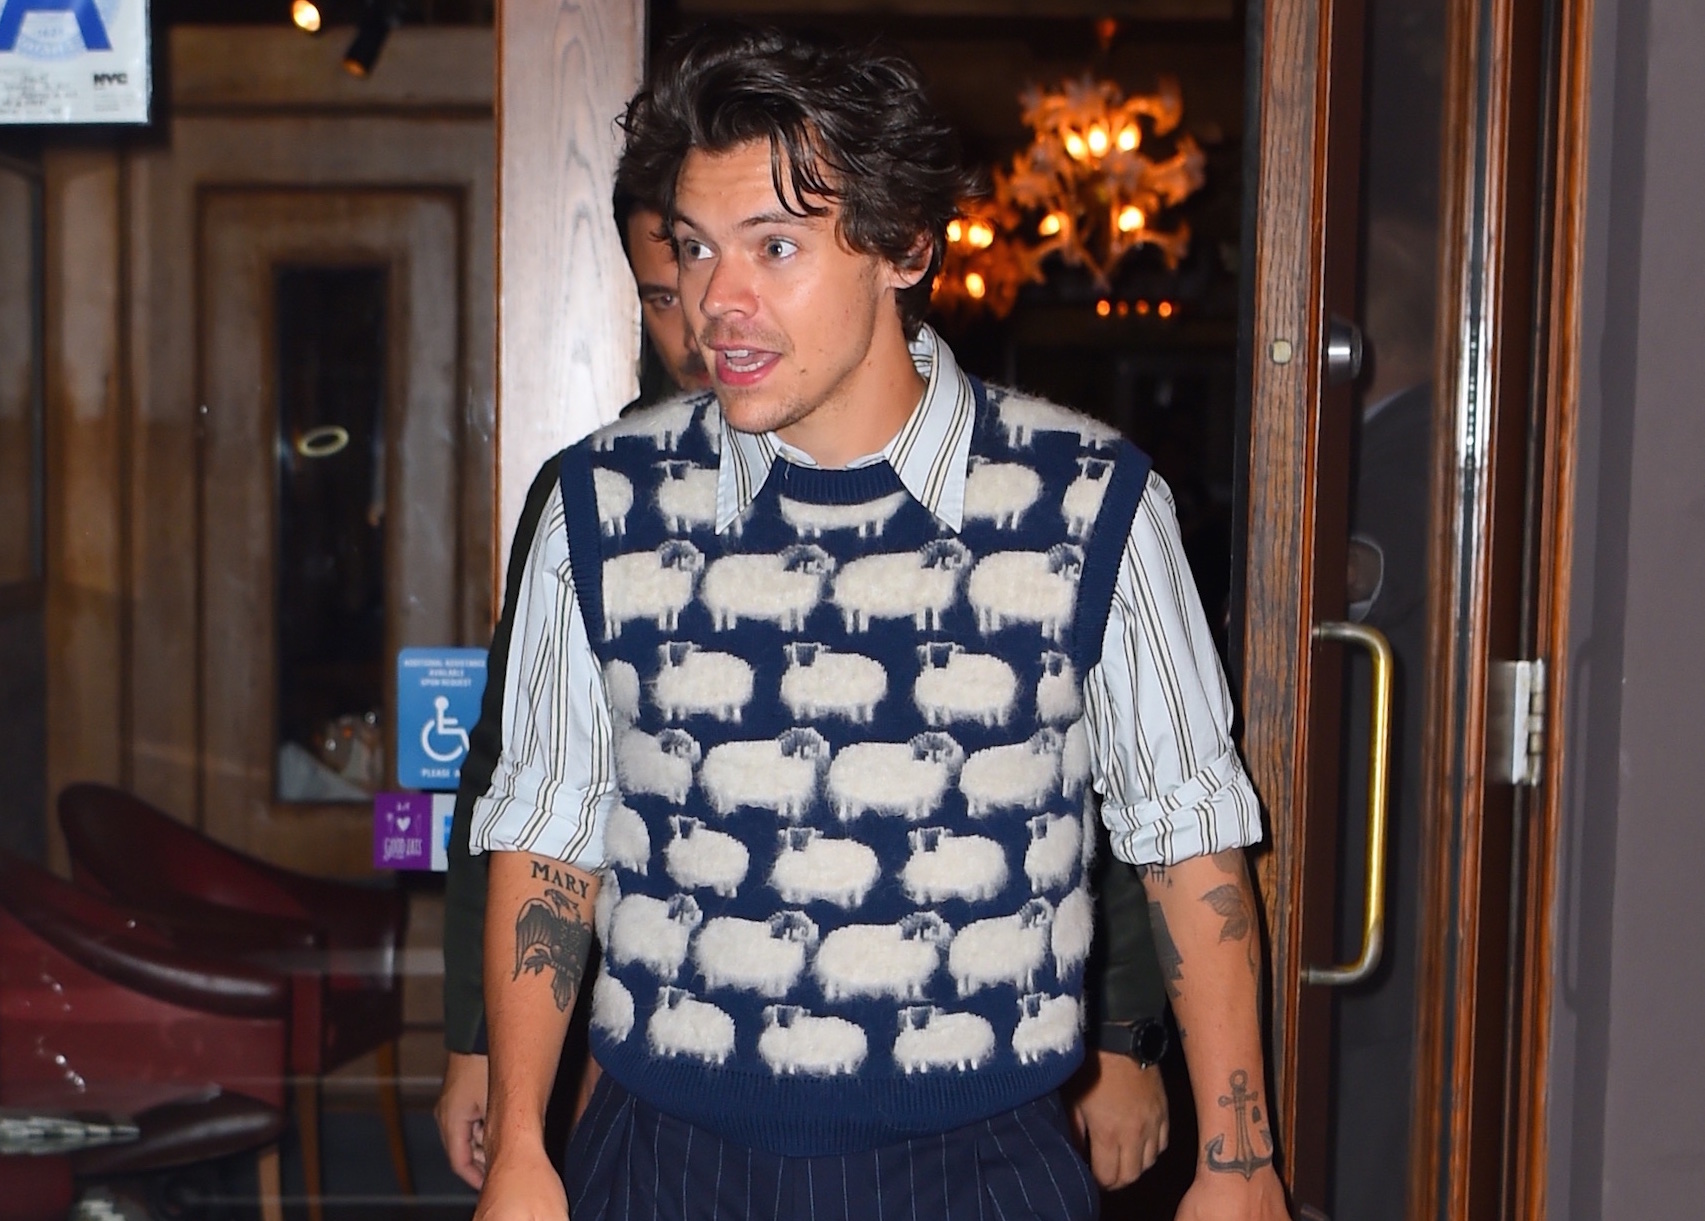 Harry Styles' Latest Look Could Be His Weirdest Yet